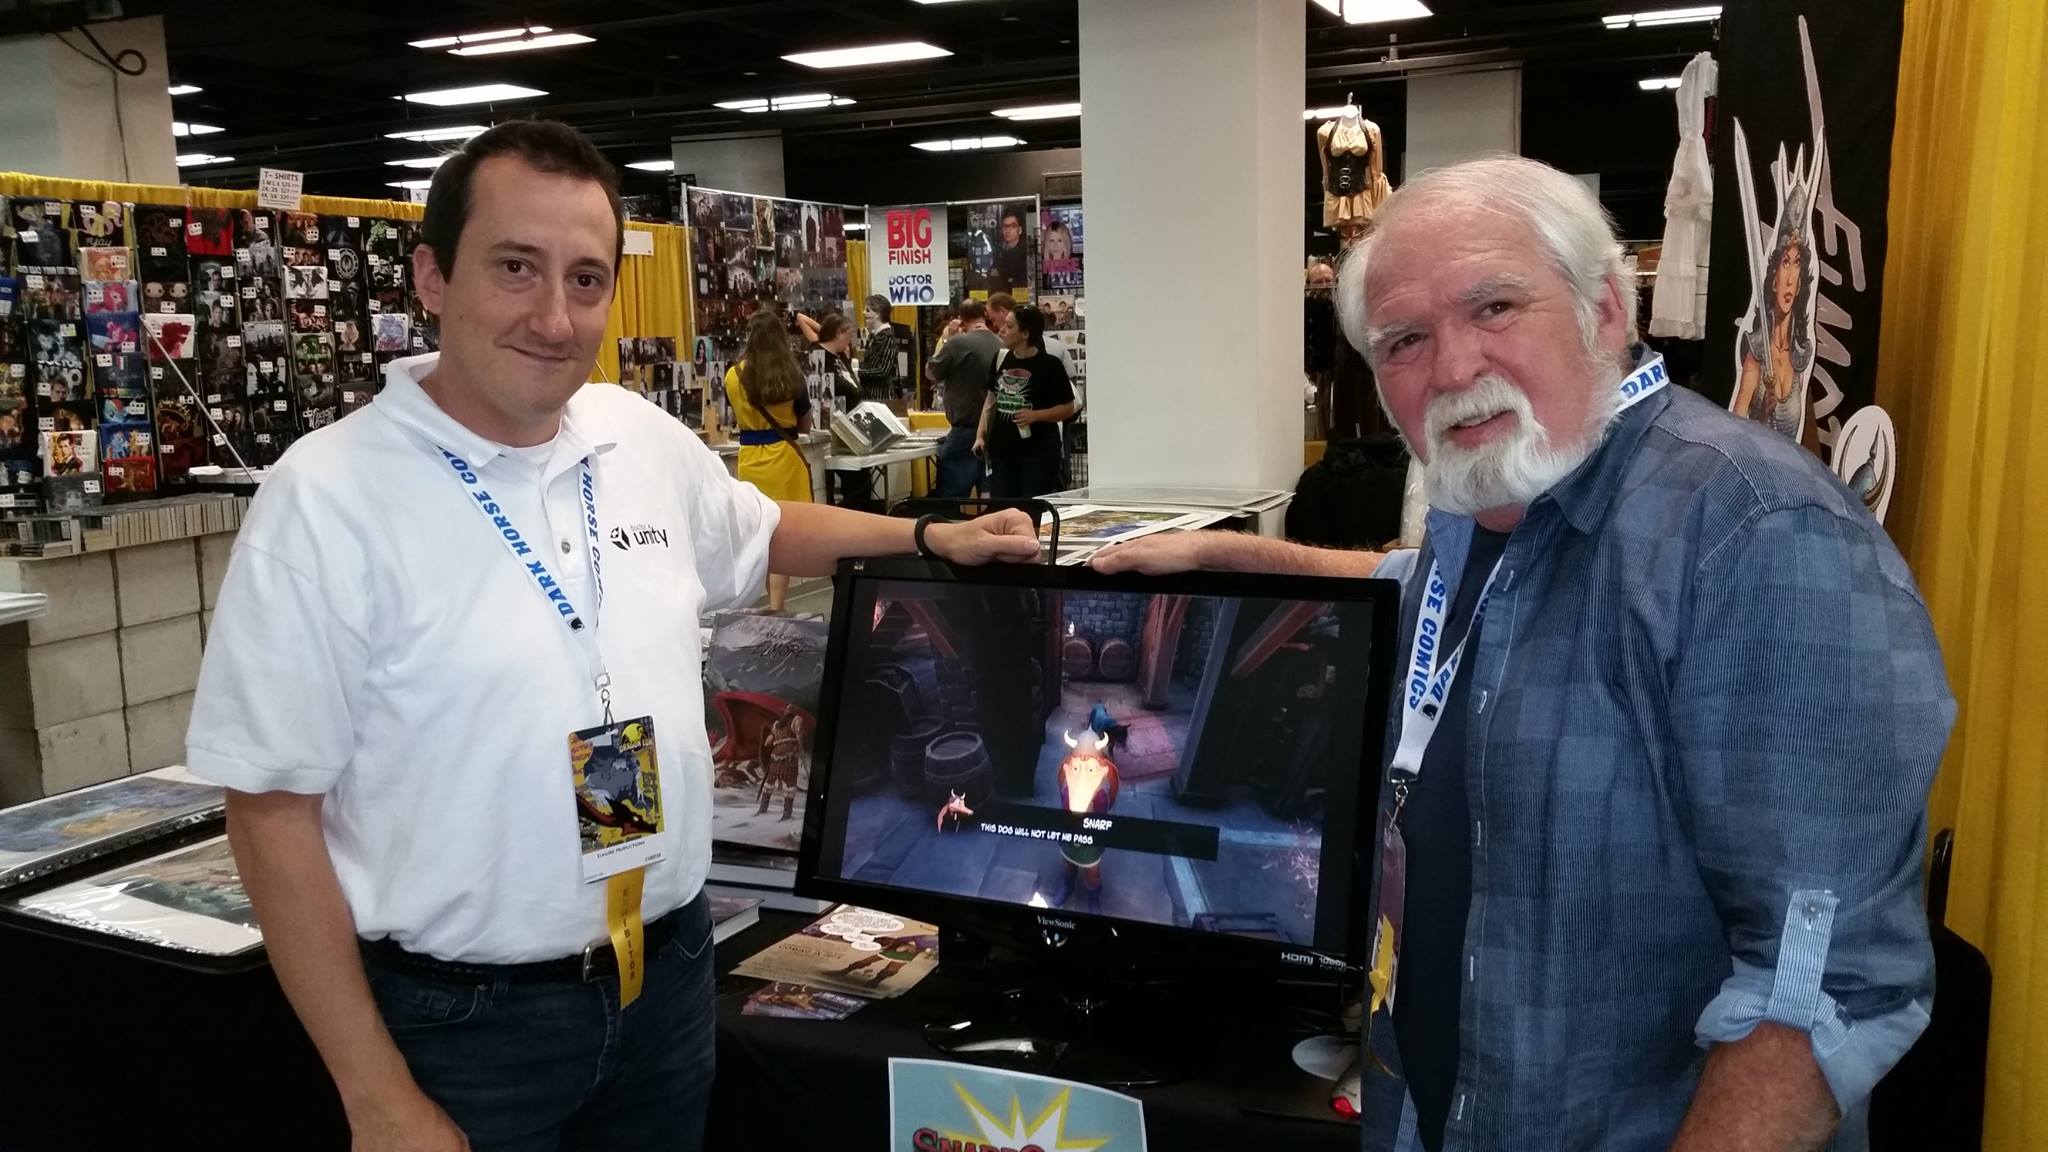 James Simpson, President of Cellbloc Studios (left) and Larry Elmore, SnarfQuest creator (right) promoting SnarfQuest Tales at a convention